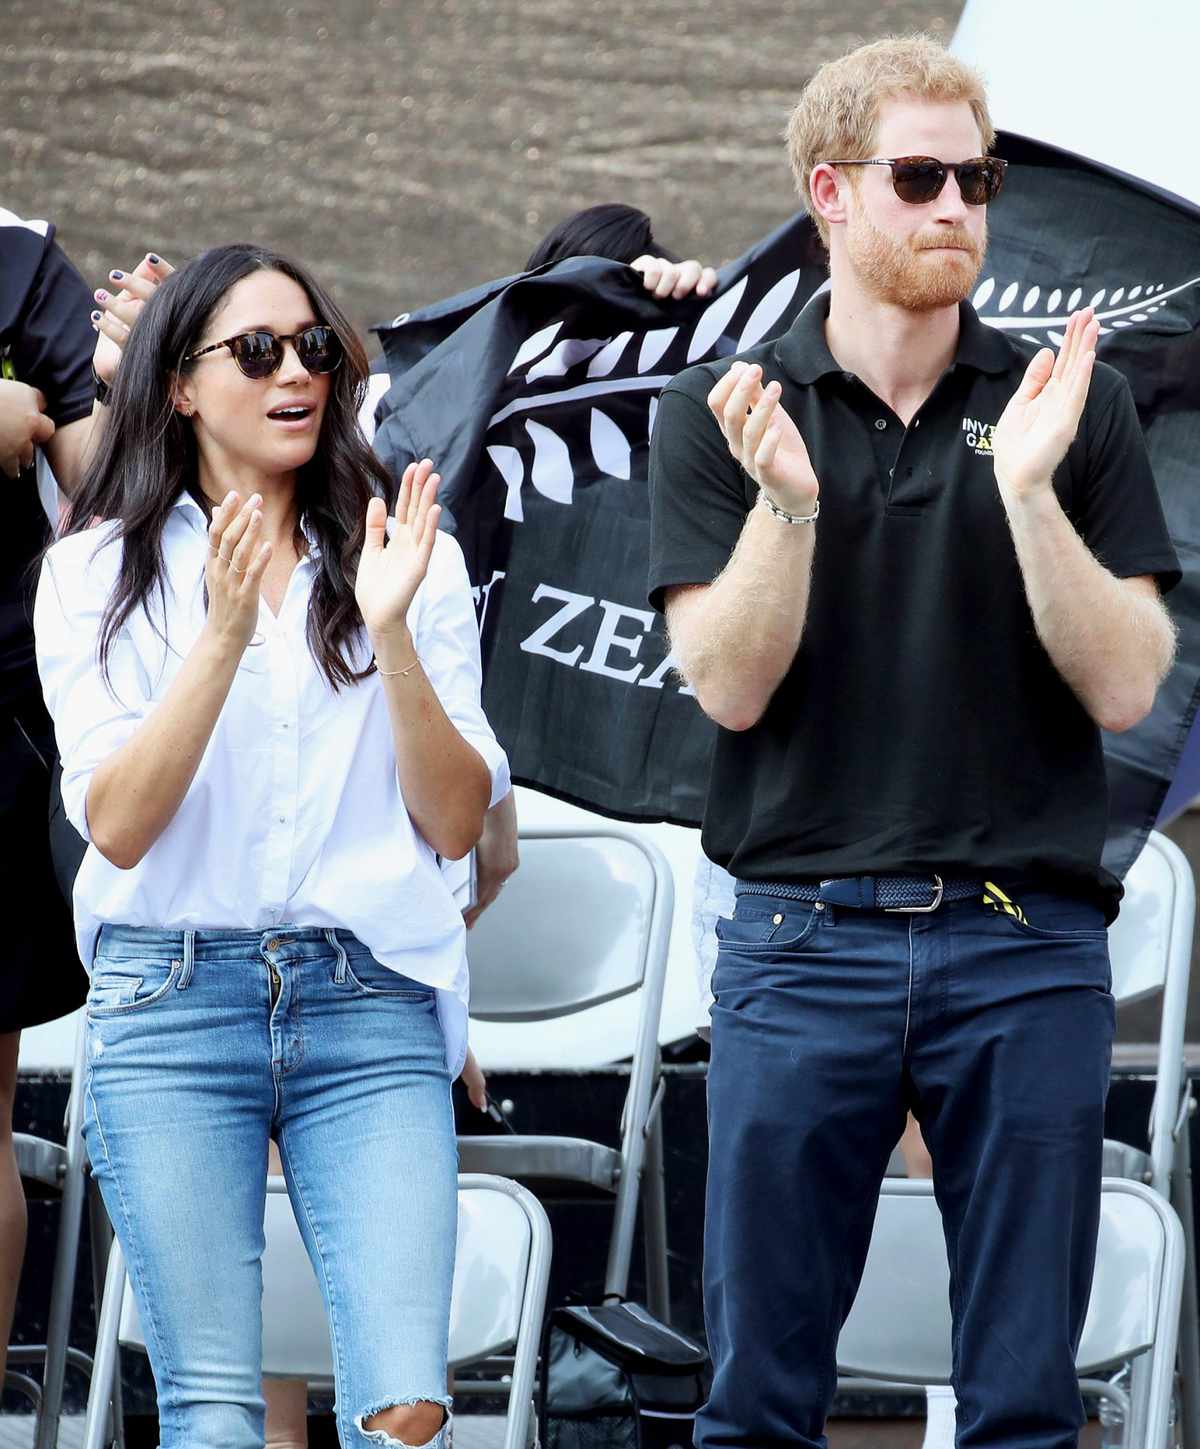 At This Exact Moment Meghan Realized Her Sunglasses Matched Harry's.